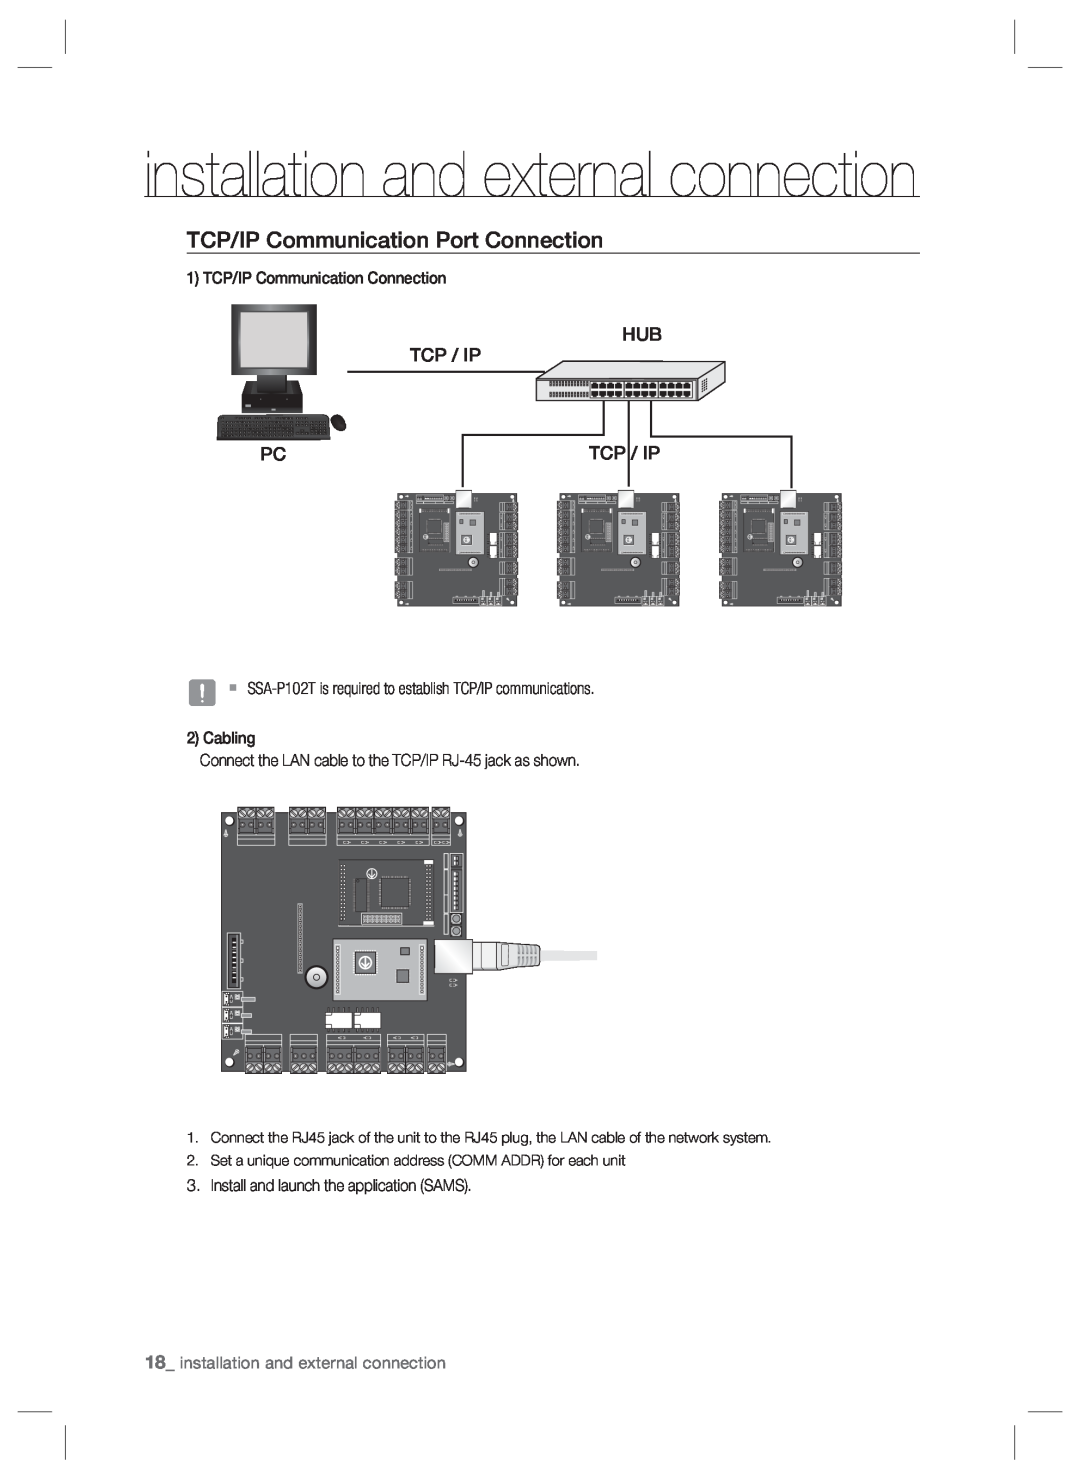 Samsung SSA-P102T user manual TCP/IP Communication Port Connection, installation and external connection, Hub Tcp / Ip 